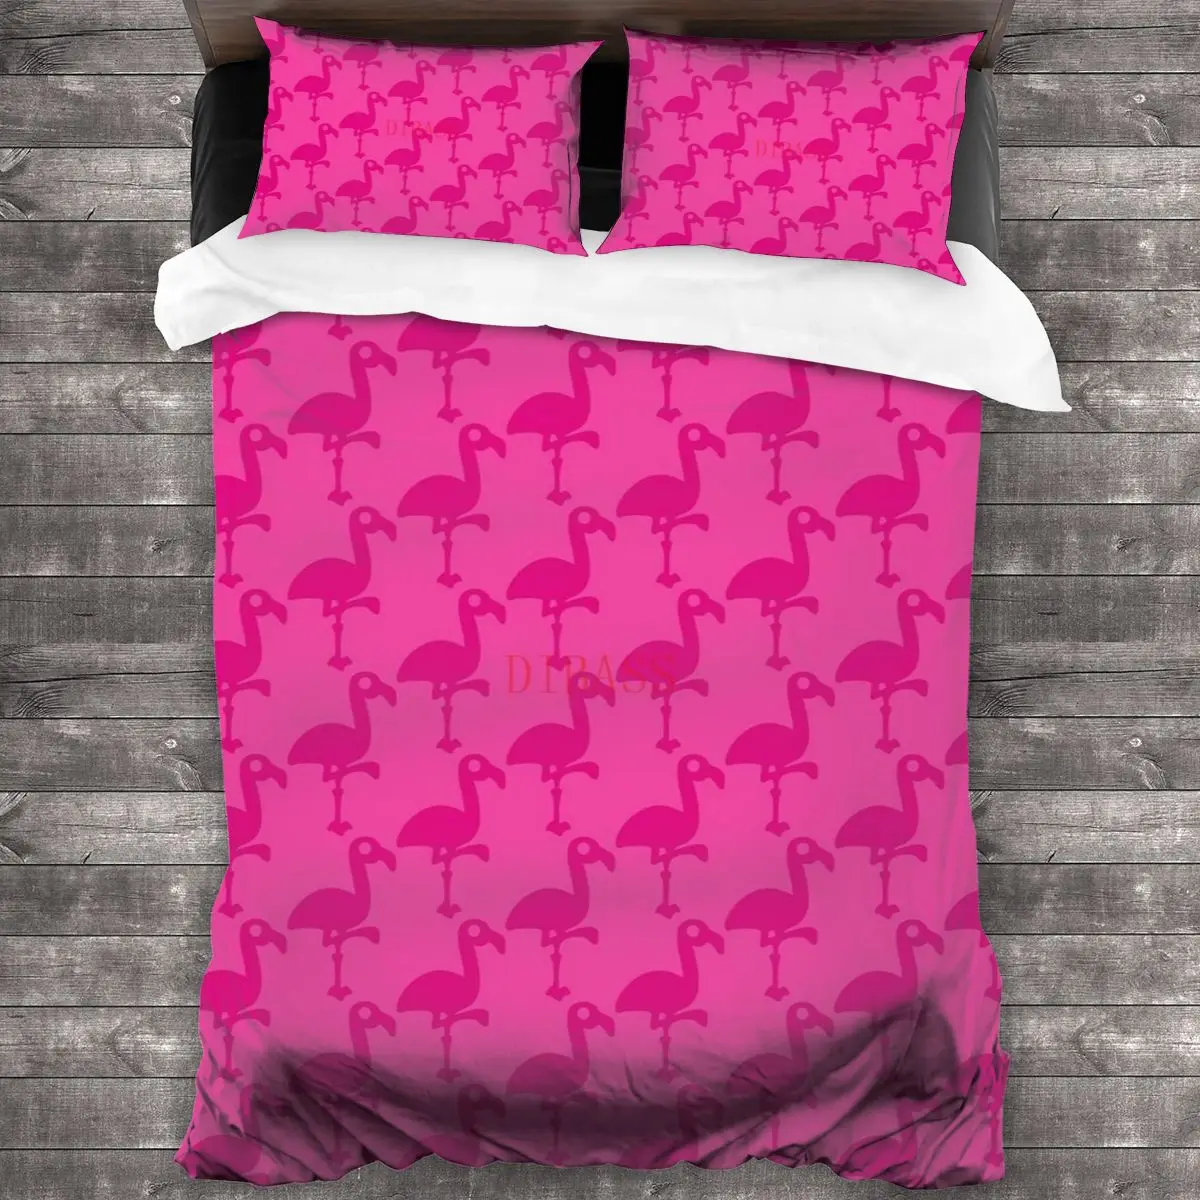 

Flamingo - Pink Panic Soft Microfiber Comforter Set with 2 Pillowcase Quilt Cover With Zipper Closure